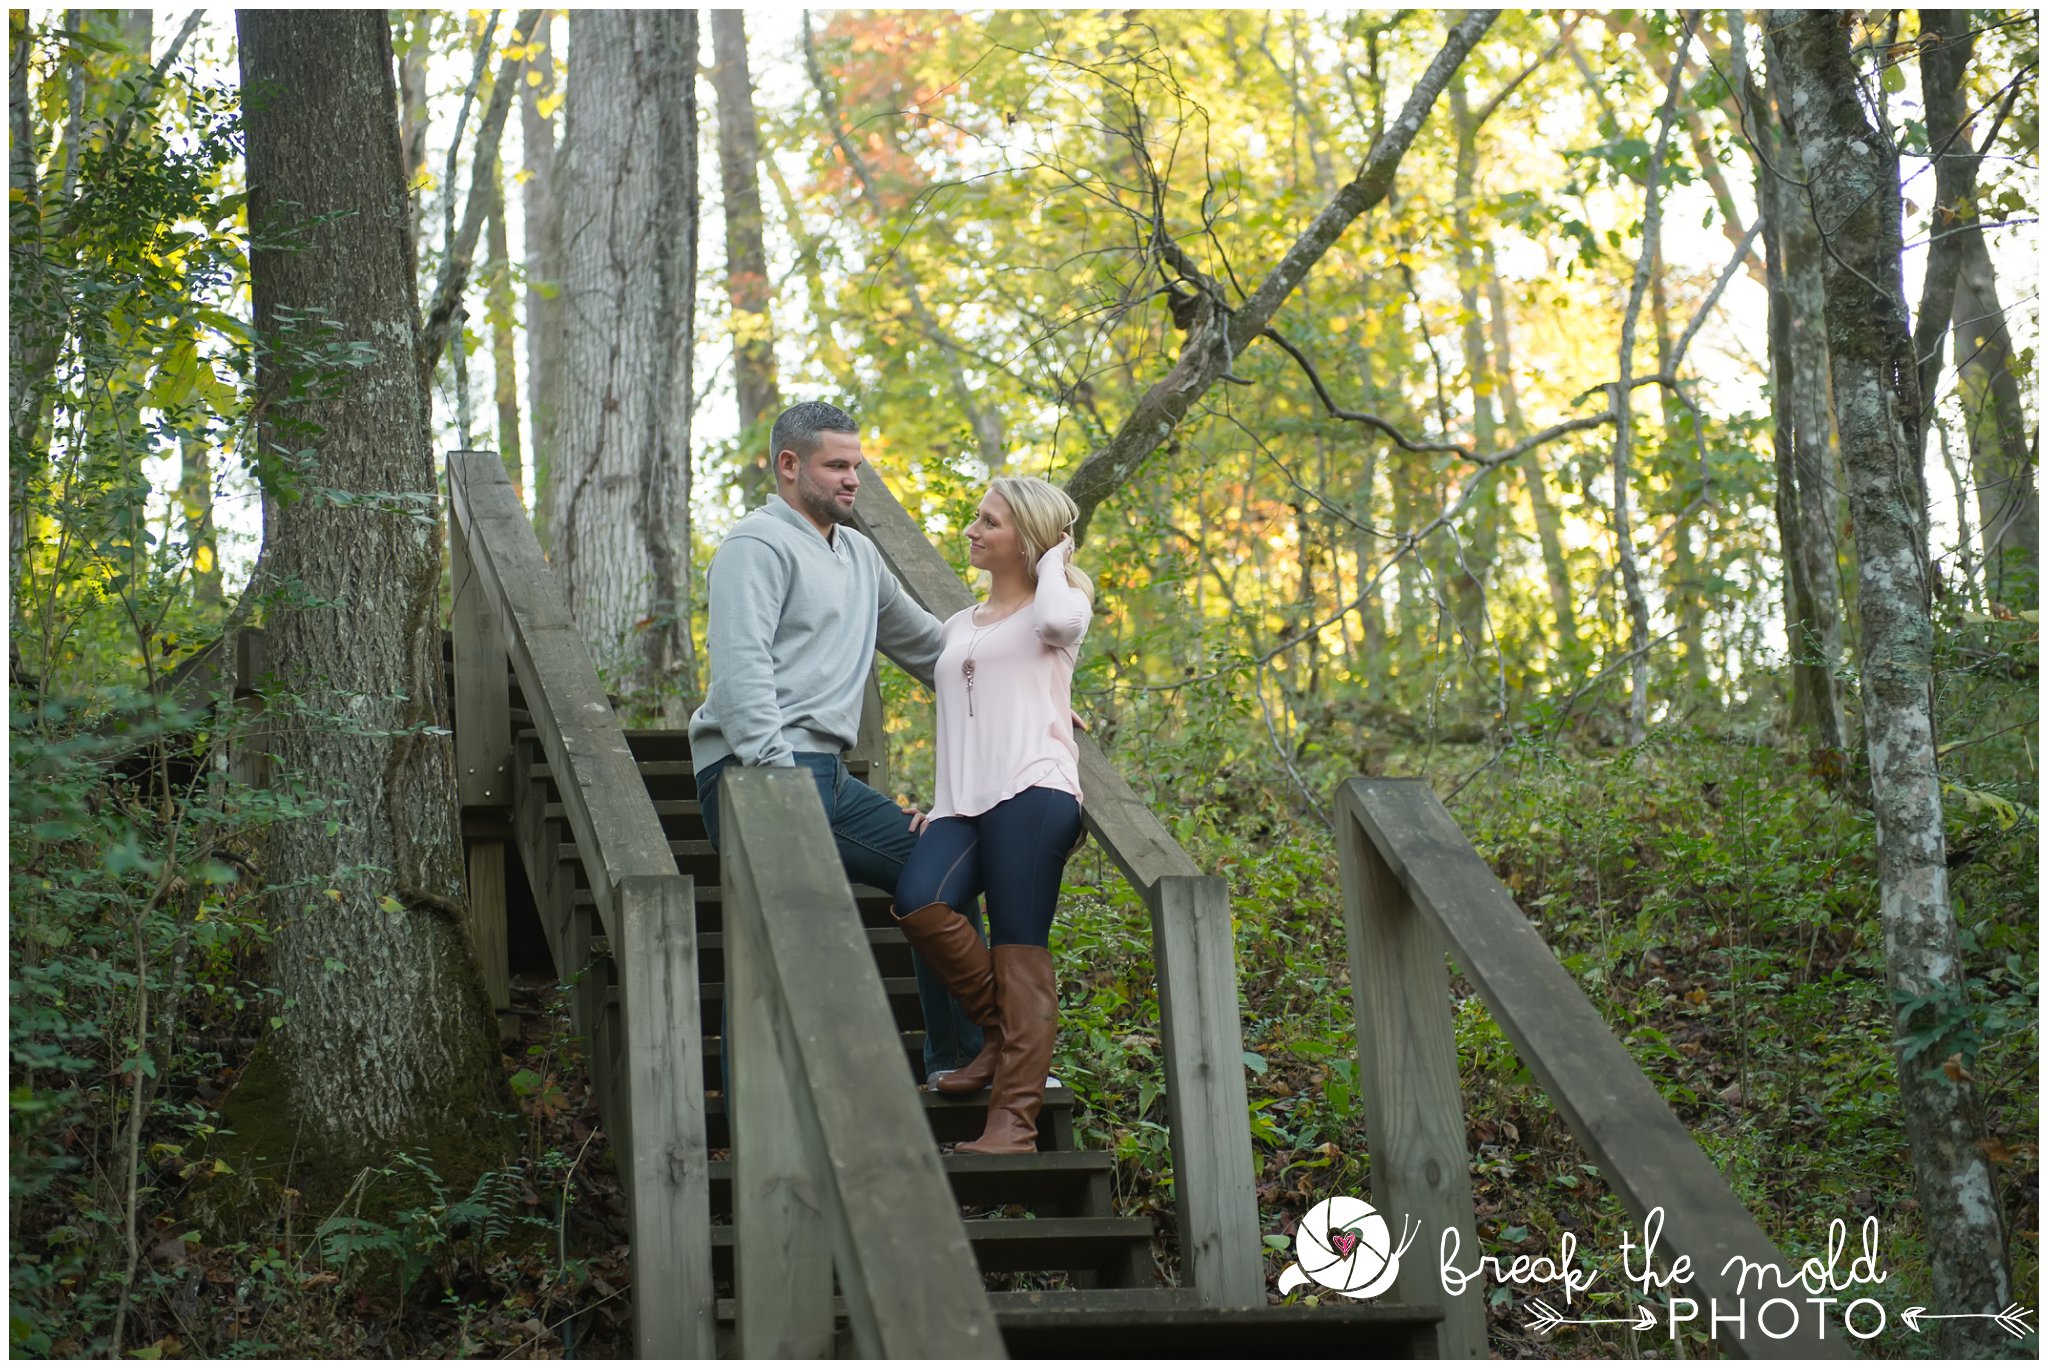 break-the-mold-photo-knoxville-tn-lenoir-city-downtown-outdoor-hiking-engagement-session_1999.jpg